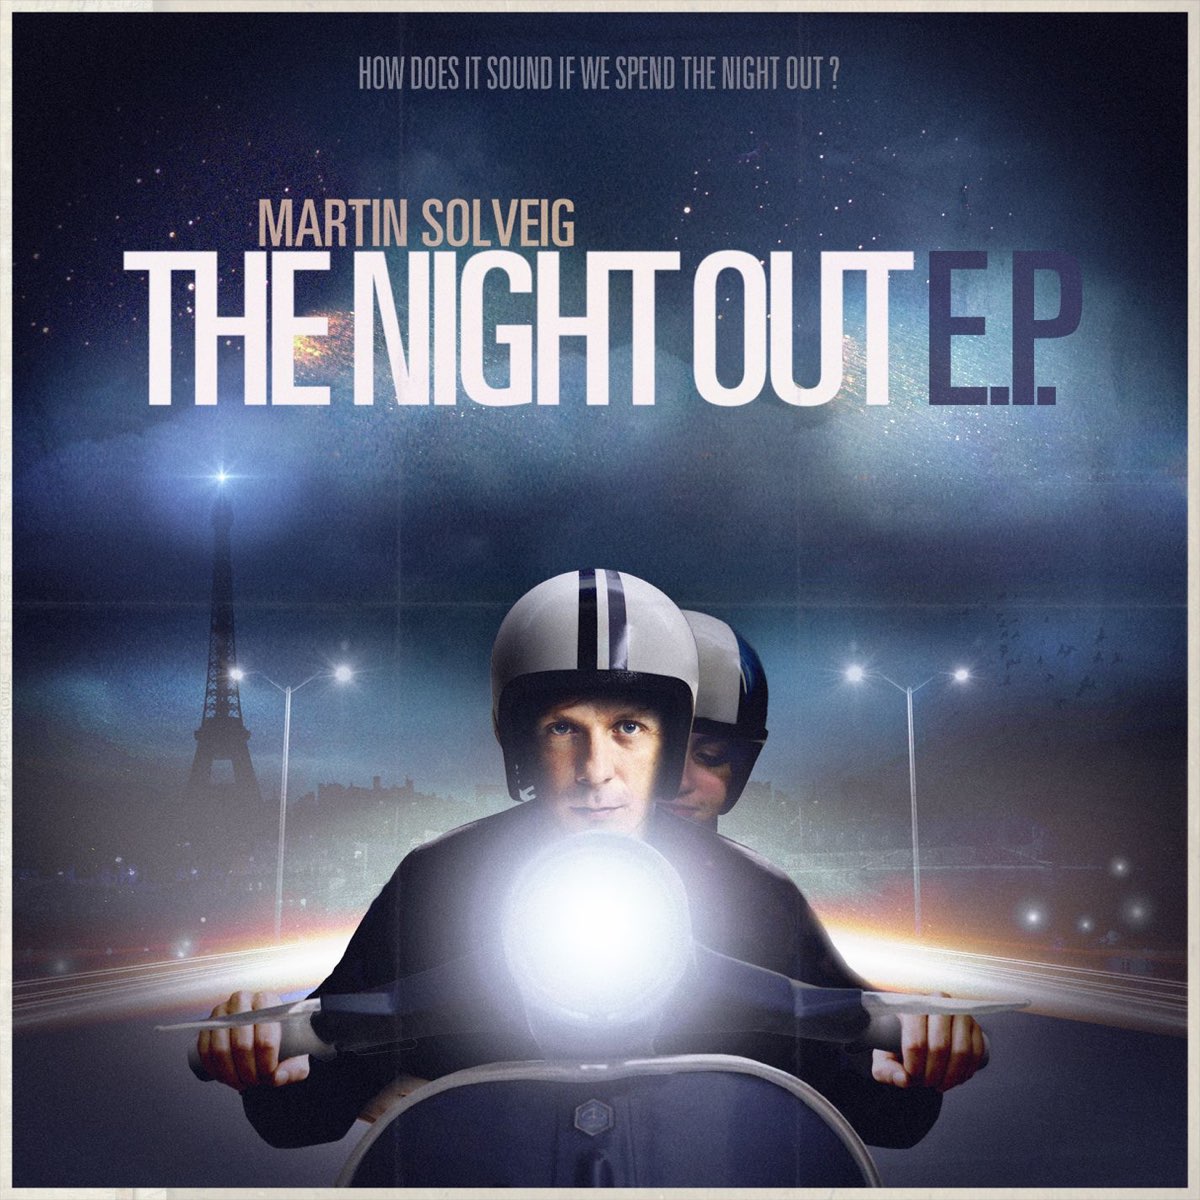 The Night Out by Martin Solveig on Apple Music